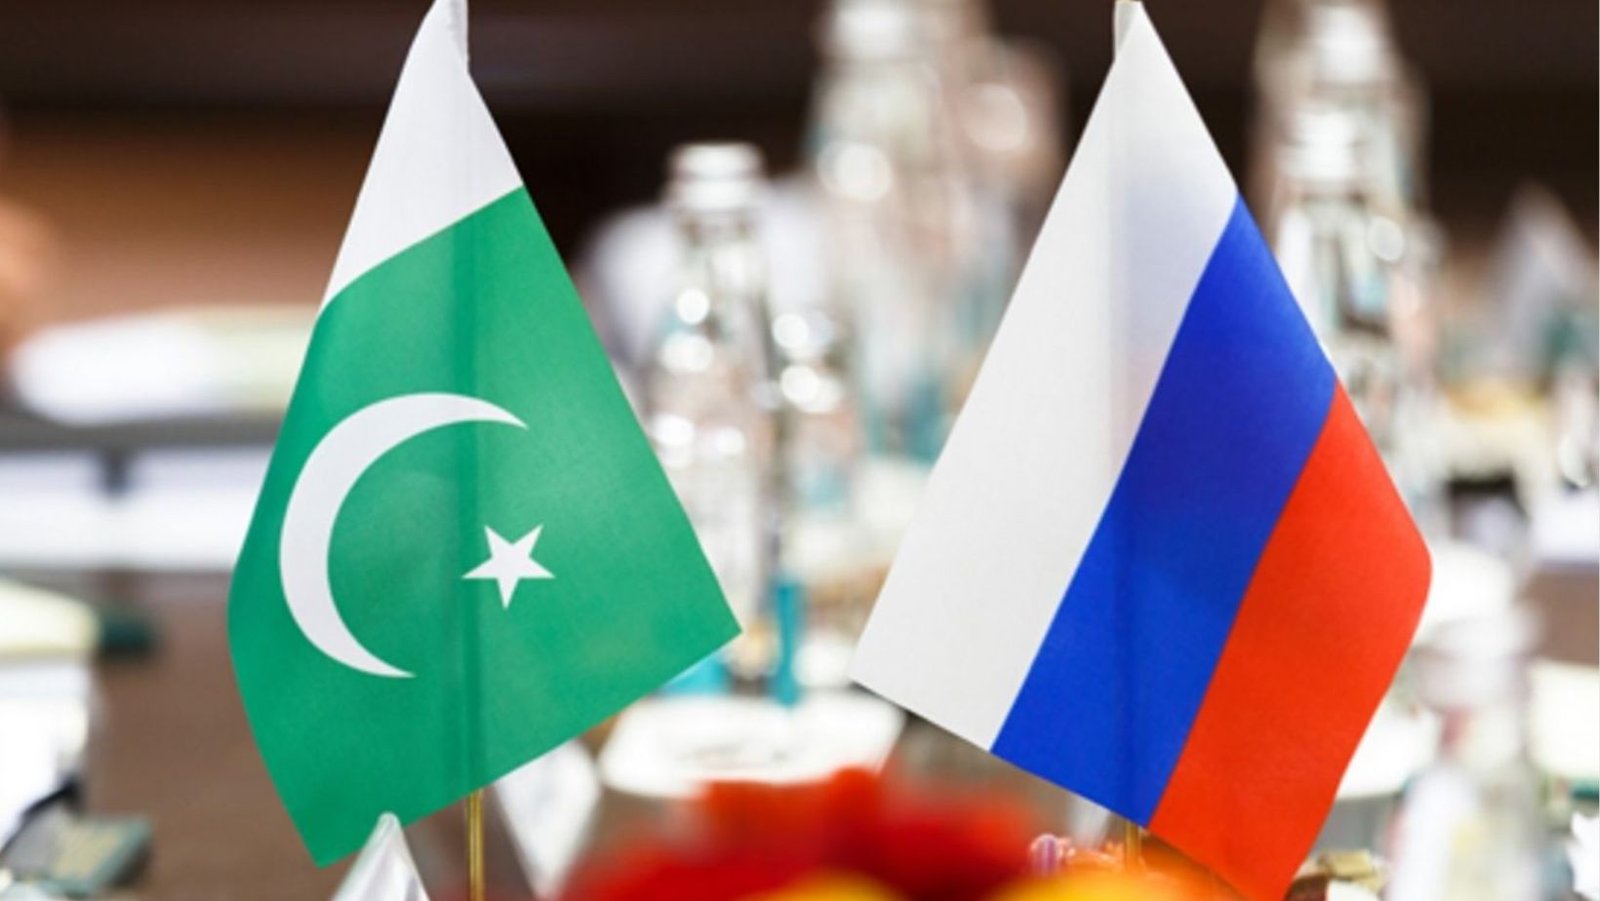 After a long pause, Pakistan resumes imports of low-cost cancer drugs from Russia